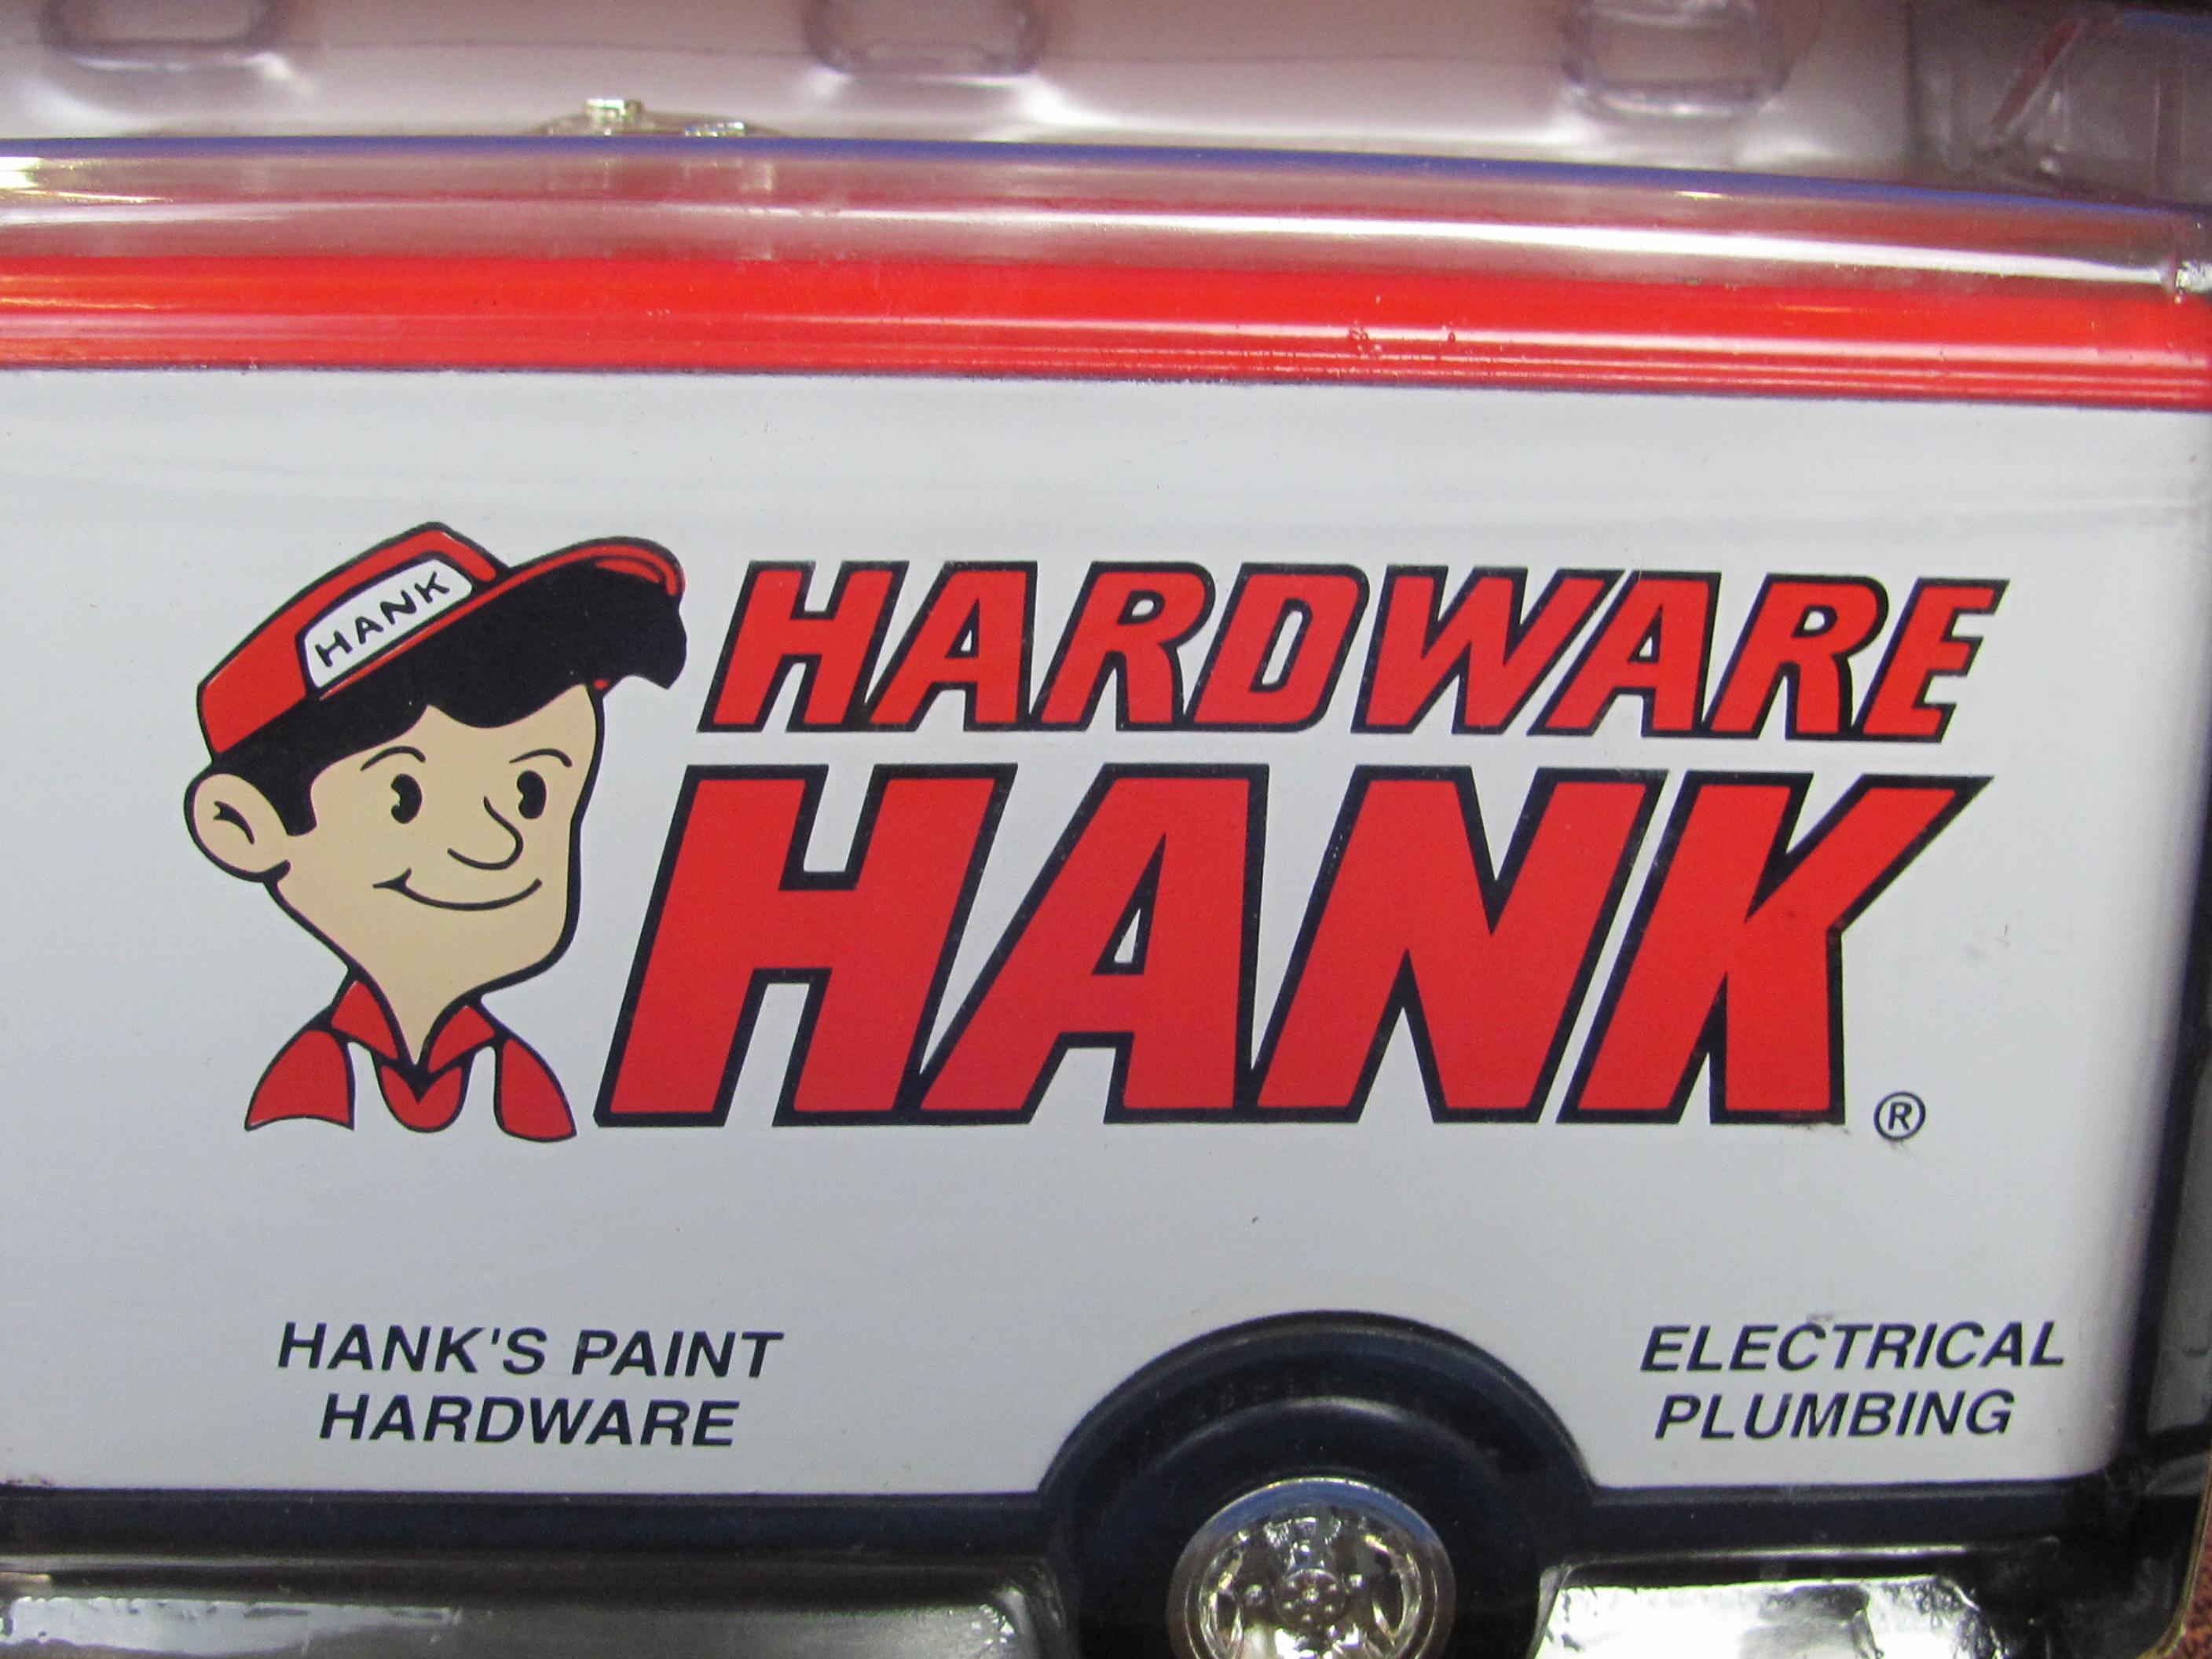 Ertl 1953 Ford Delivery Van – Hardware Hank – 1996 – 8 1/2” long – New in Box